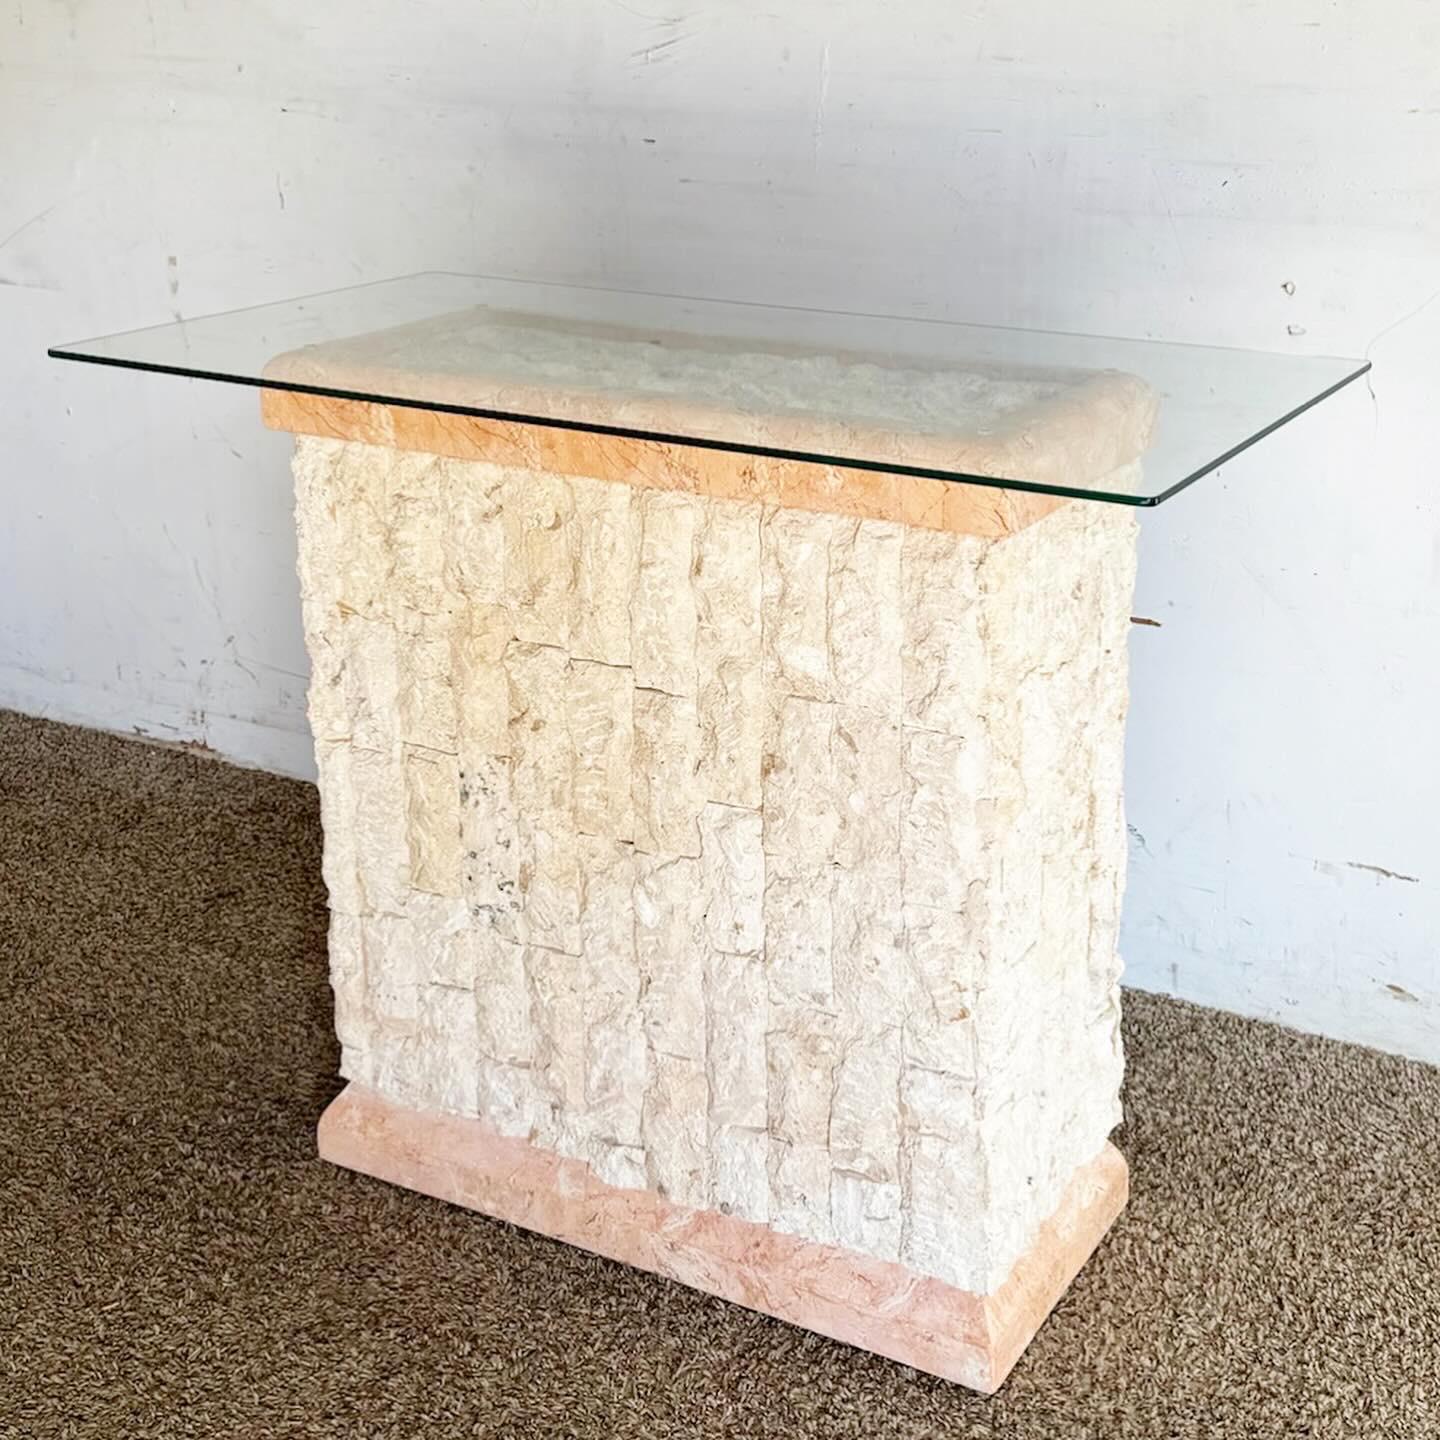 The Postmodern Pink and Beige Tessellated Stone Console Table is a perfect blend of art and functionality. It features a tessellated stone base in pink and beige, creating a captivating pattern and texture. The sleek, rectangular silhouette